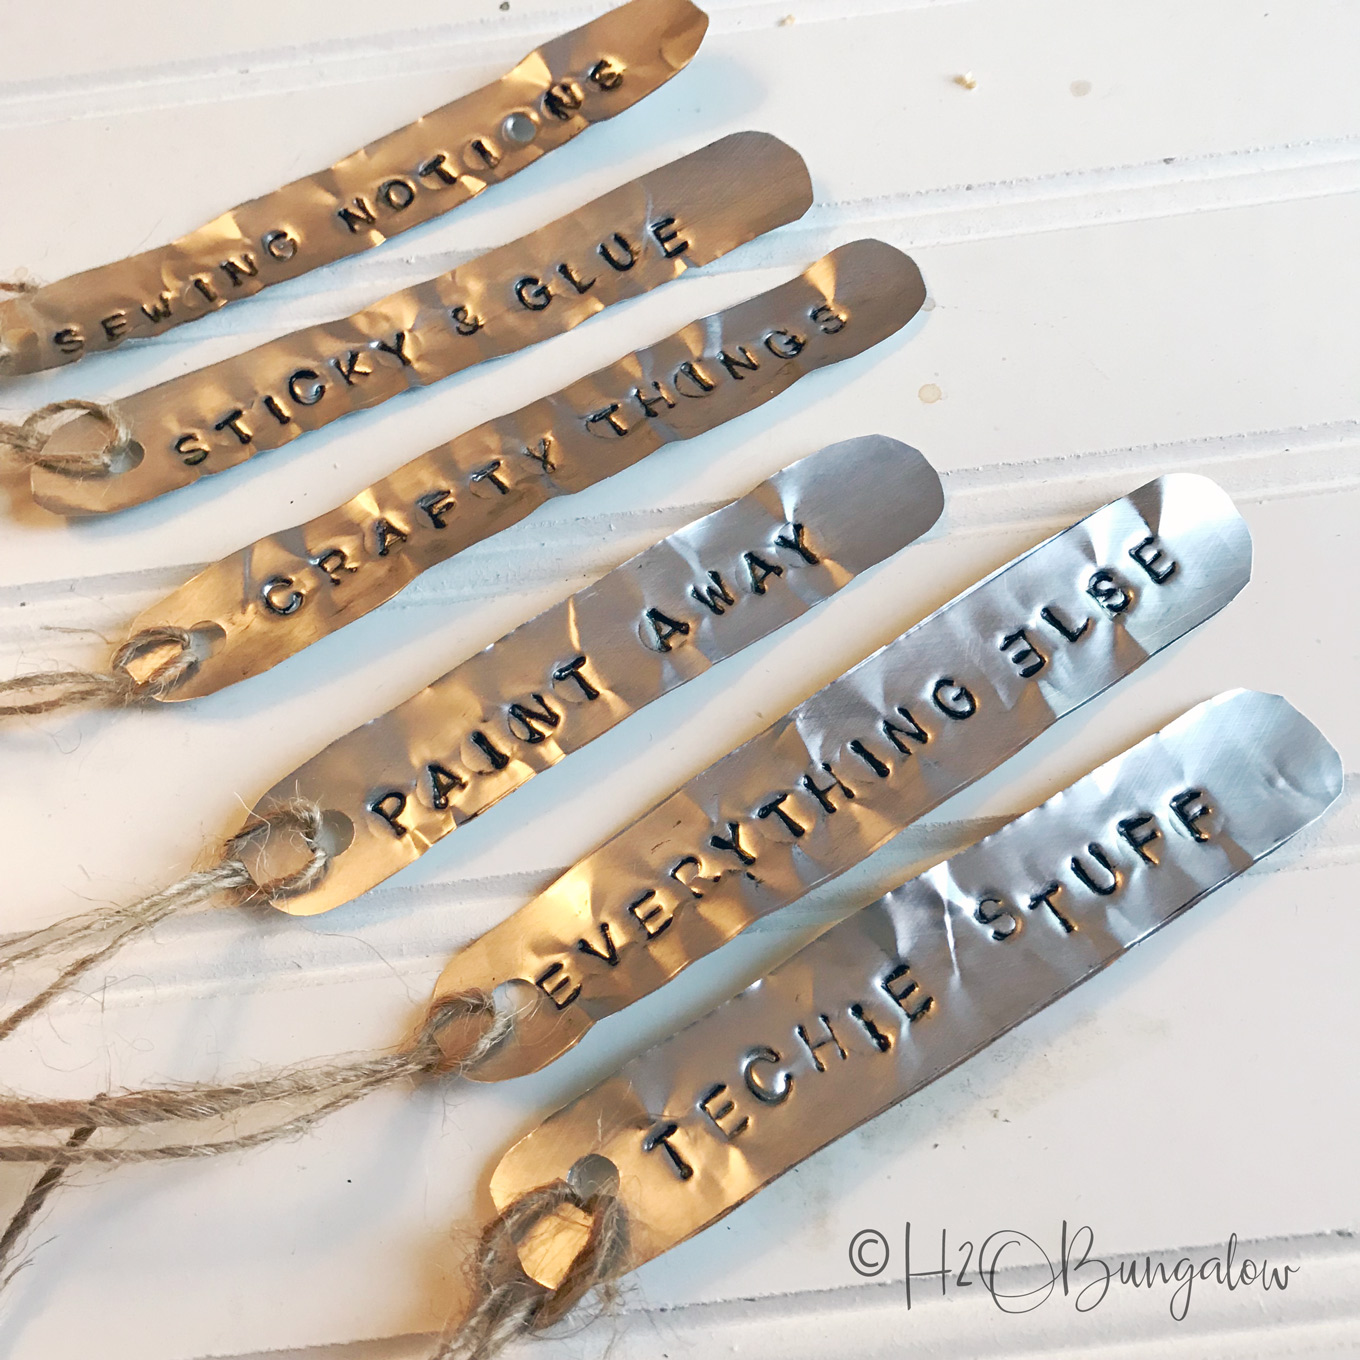 Easy to make soda can stamped metal labels for galvanized bins is a perfect farmhouse or rustic modern style home decor. Try stamping metal labels for home and office organization. One can makes several labels. Make other crafts with metal stamping and soda can metal too. 